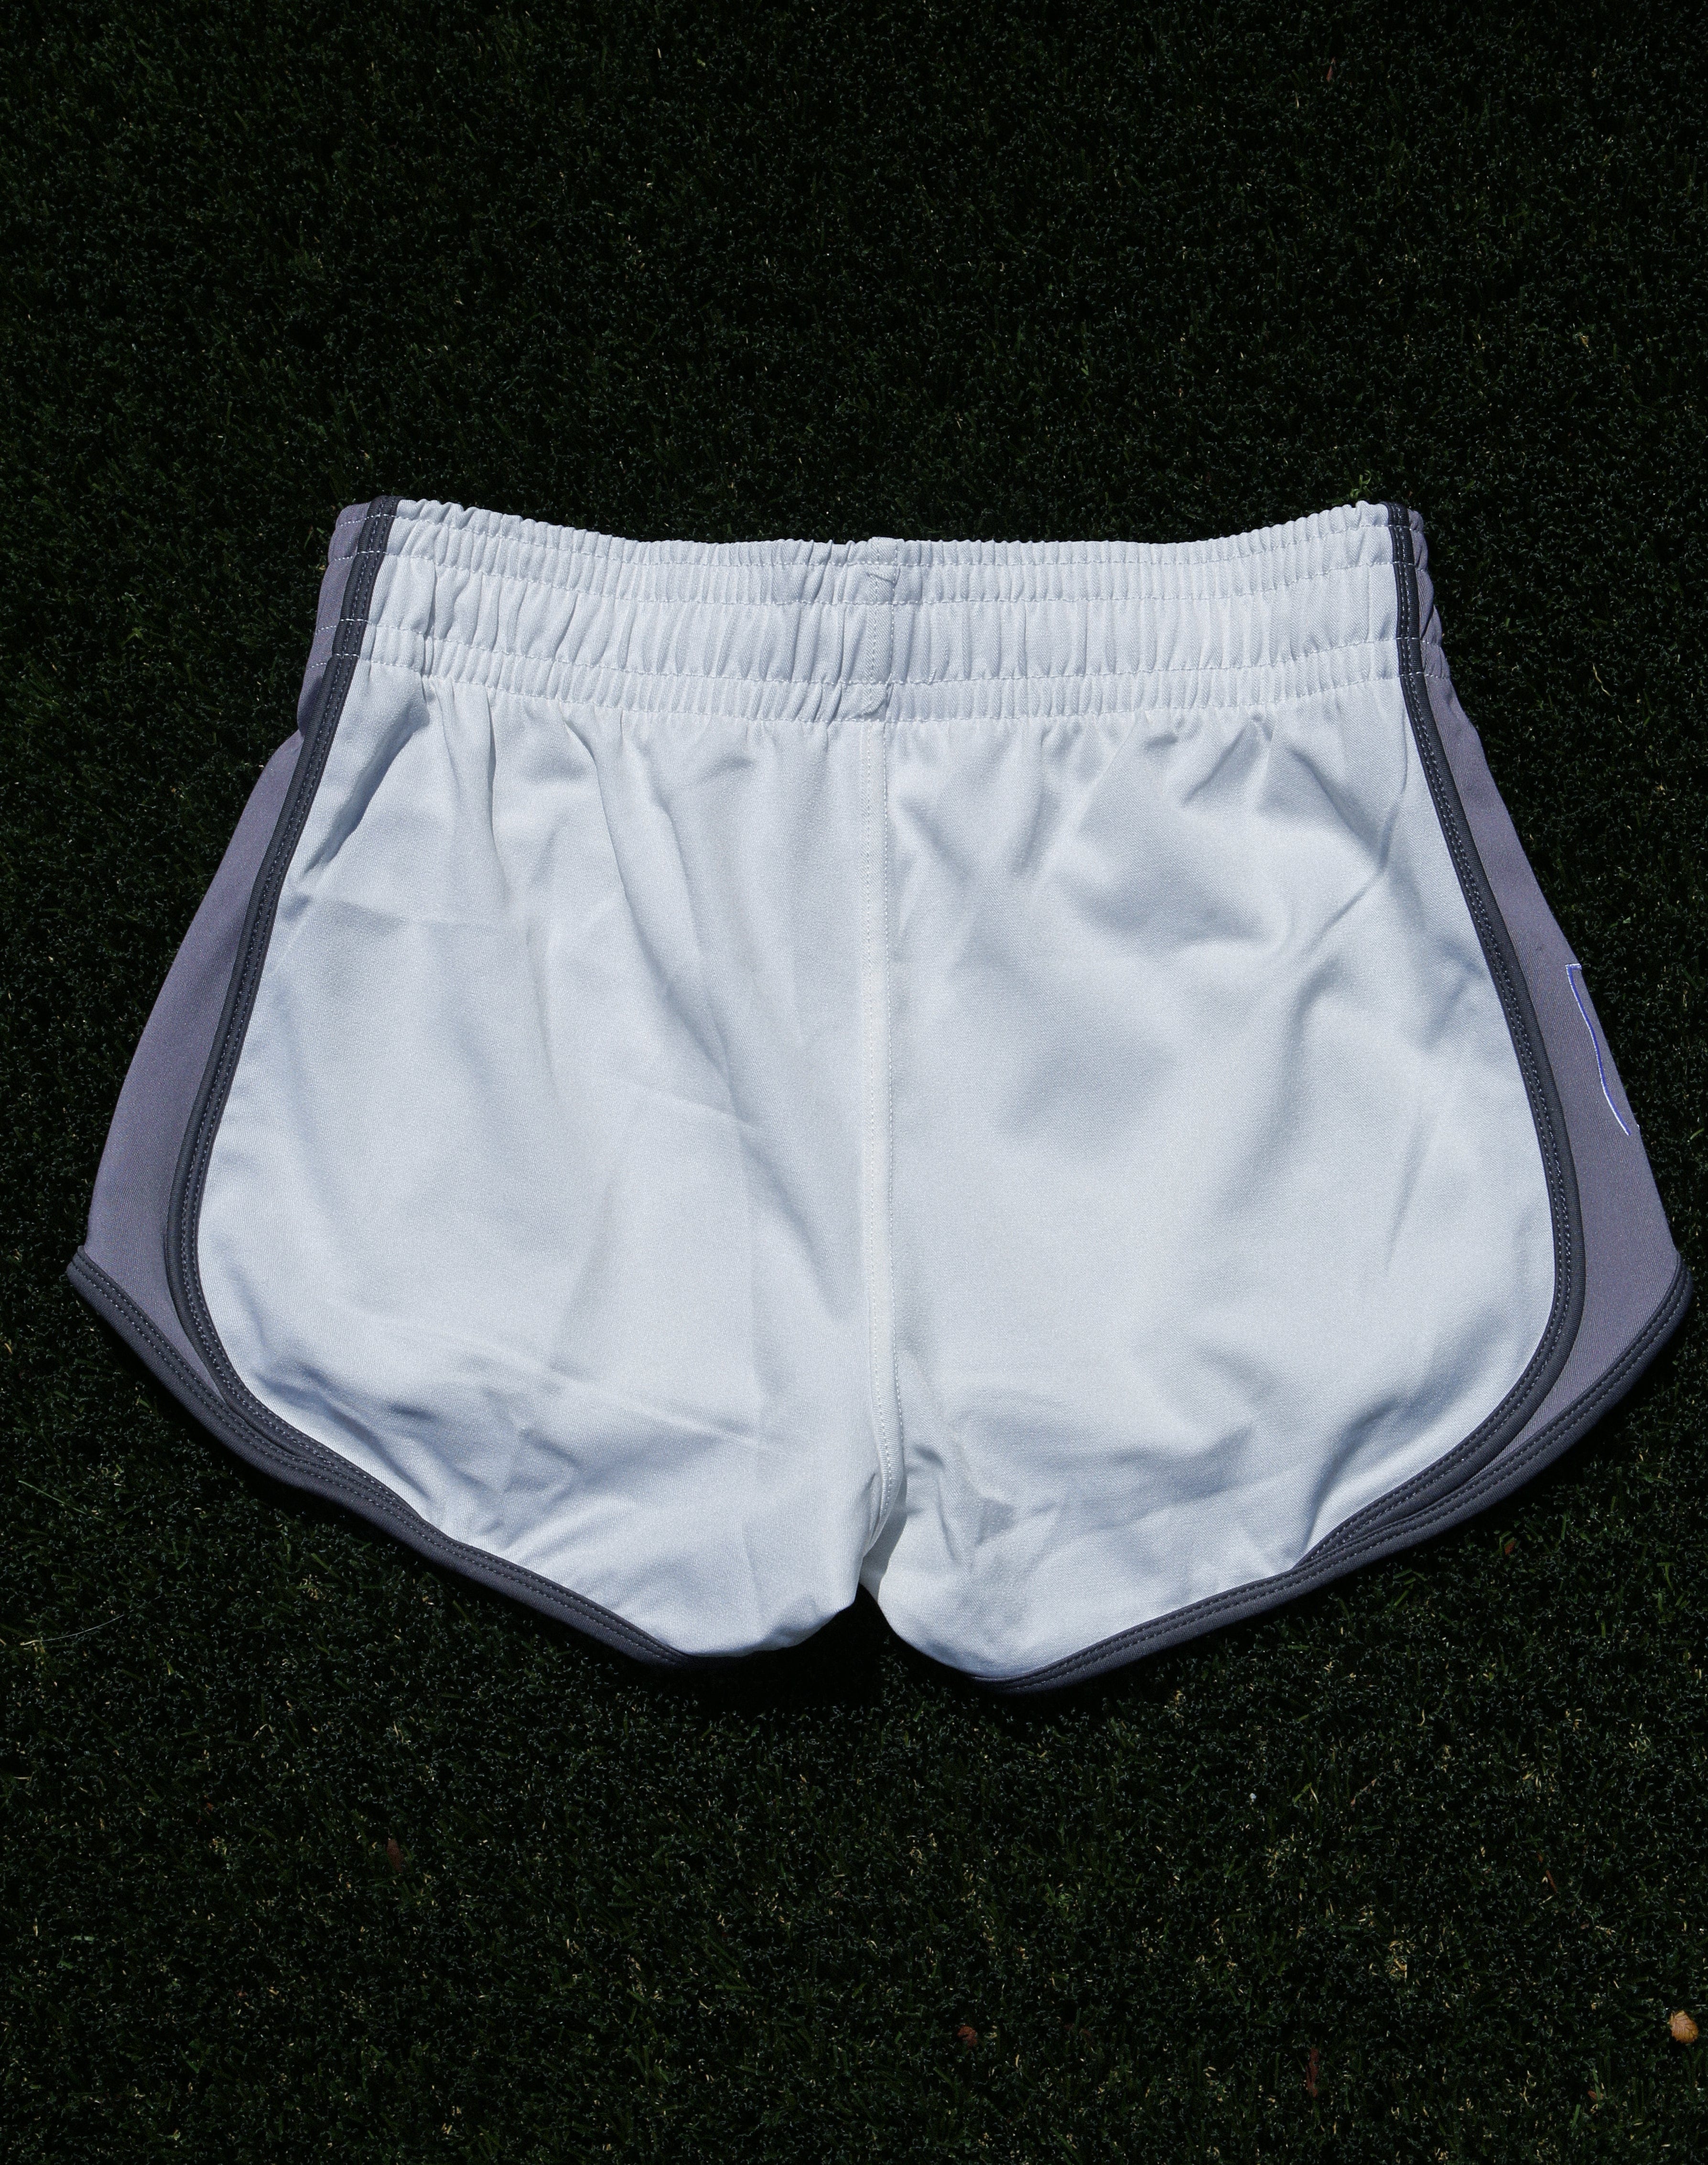 The Retro Rugby Short in Cloud Nine